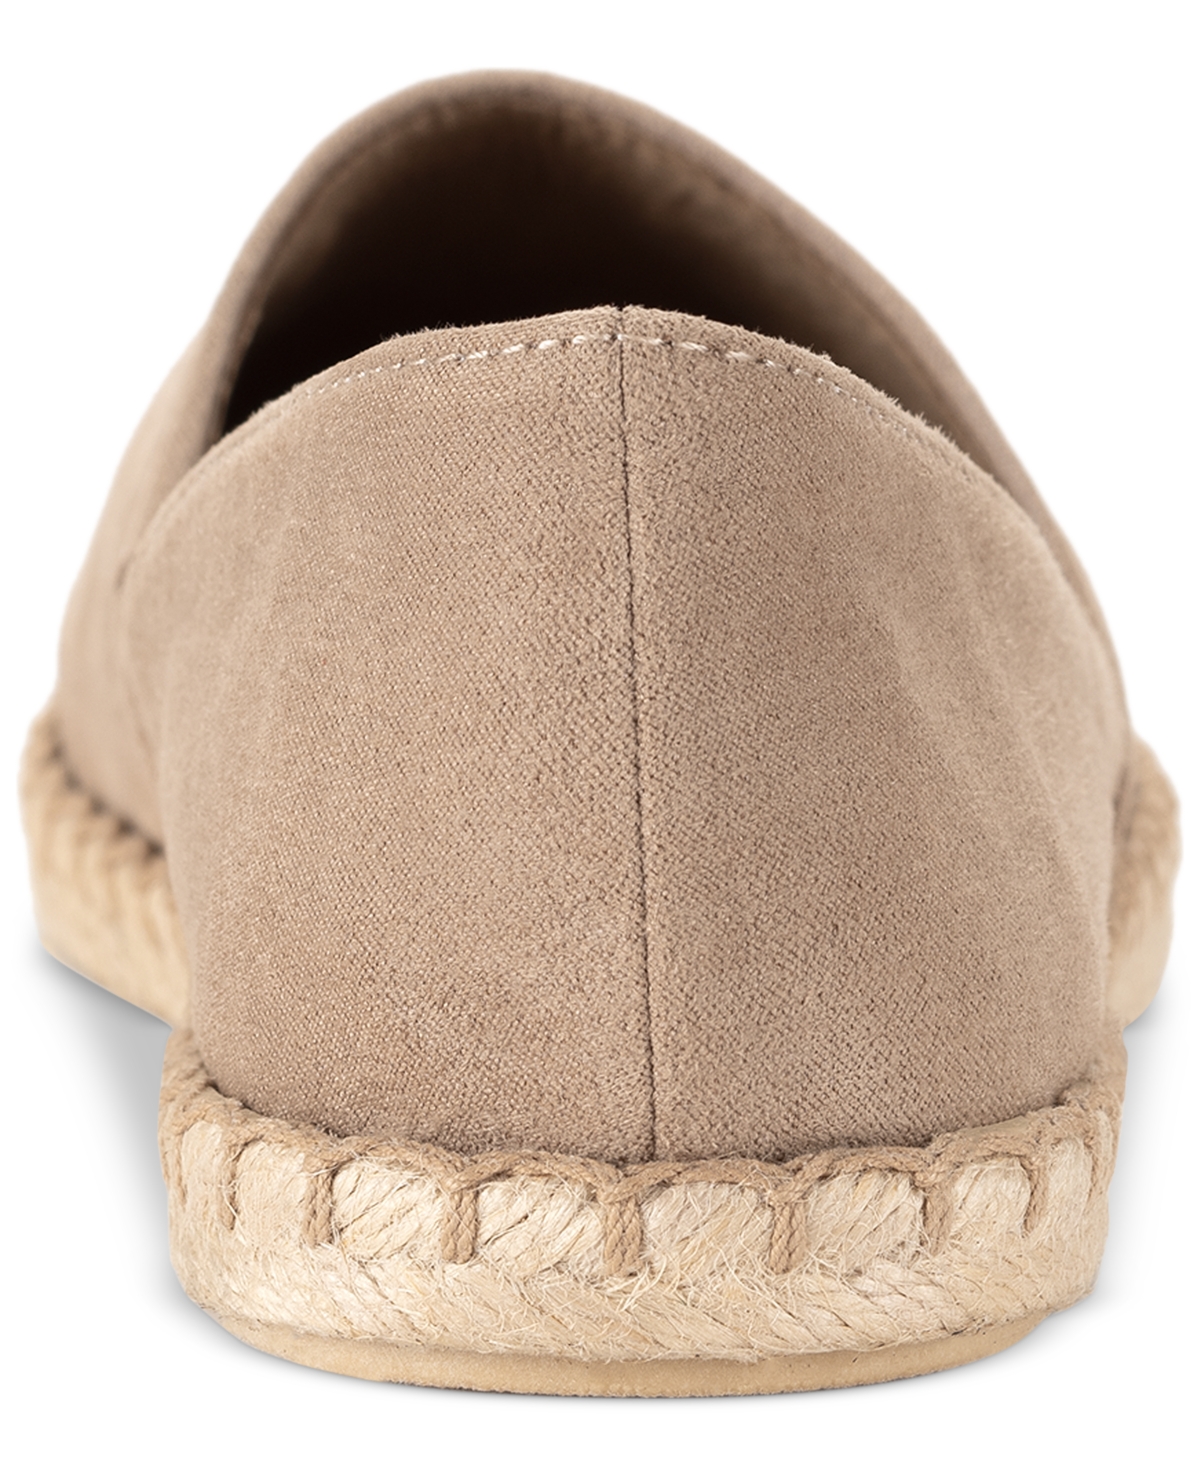 Shop Style & Co Women's Reevee Stitched-trim Espadrille Flats, Created For Macy's In Light Taupe